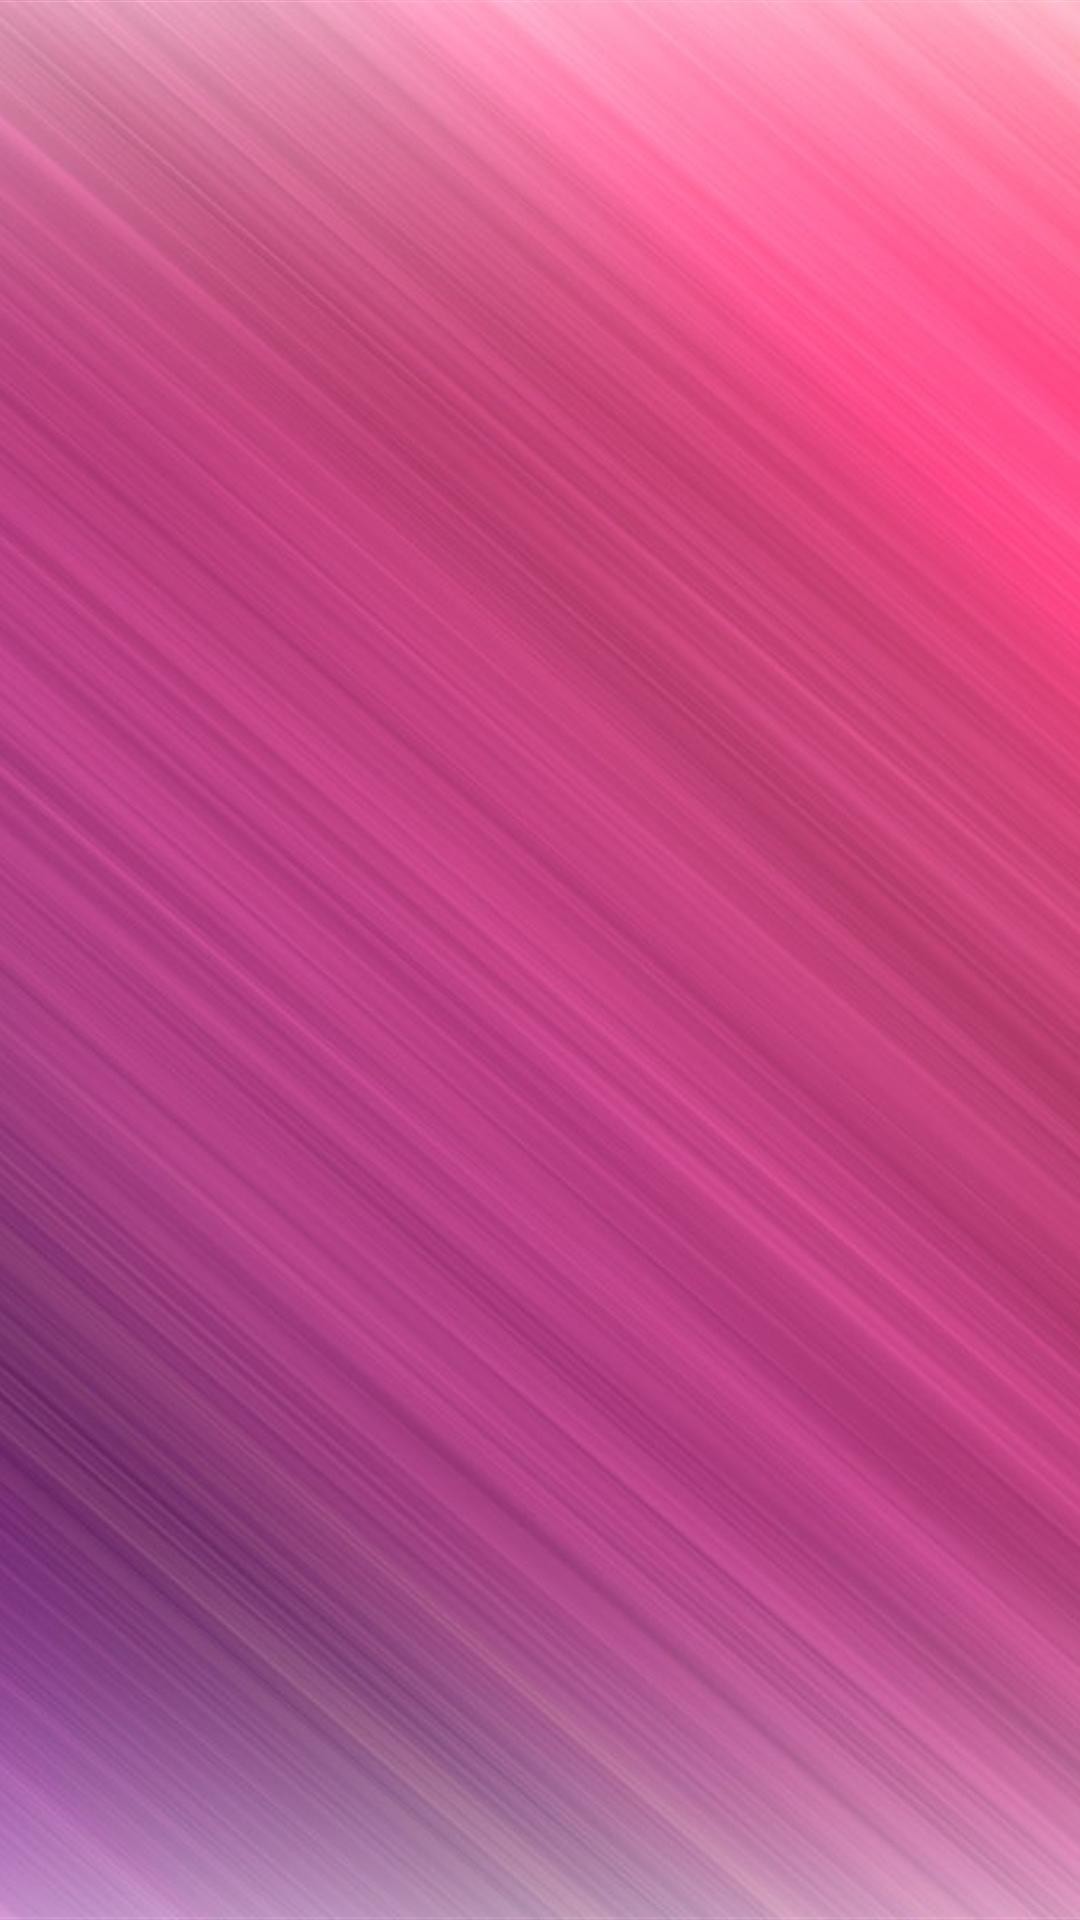 Cool Pink Backgrounds (60+ images)